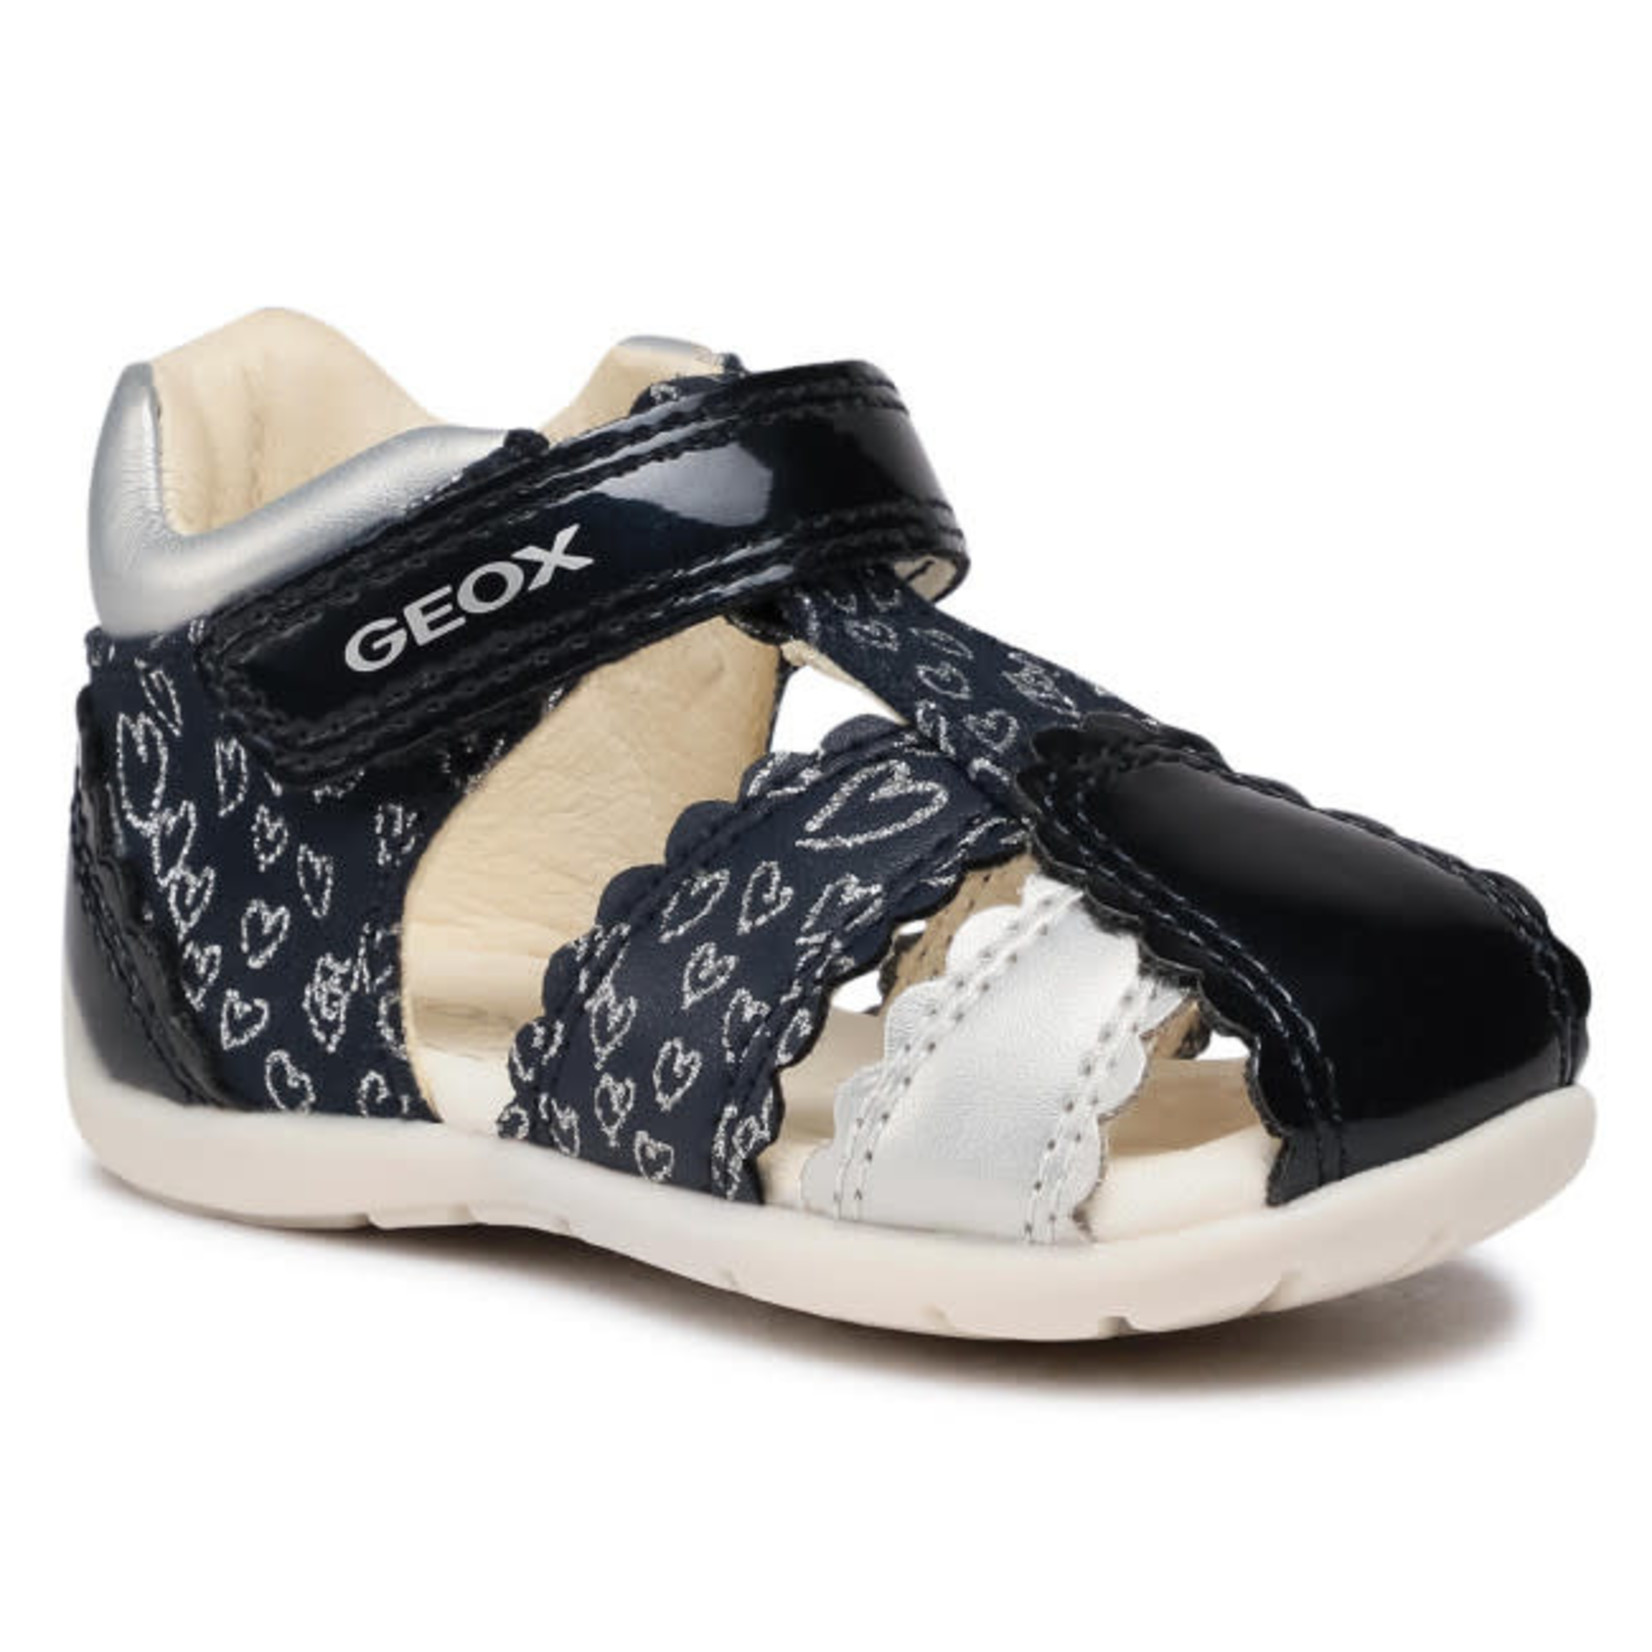 Geox GEOX ELTHAN NAVY/SILVER SANDALS